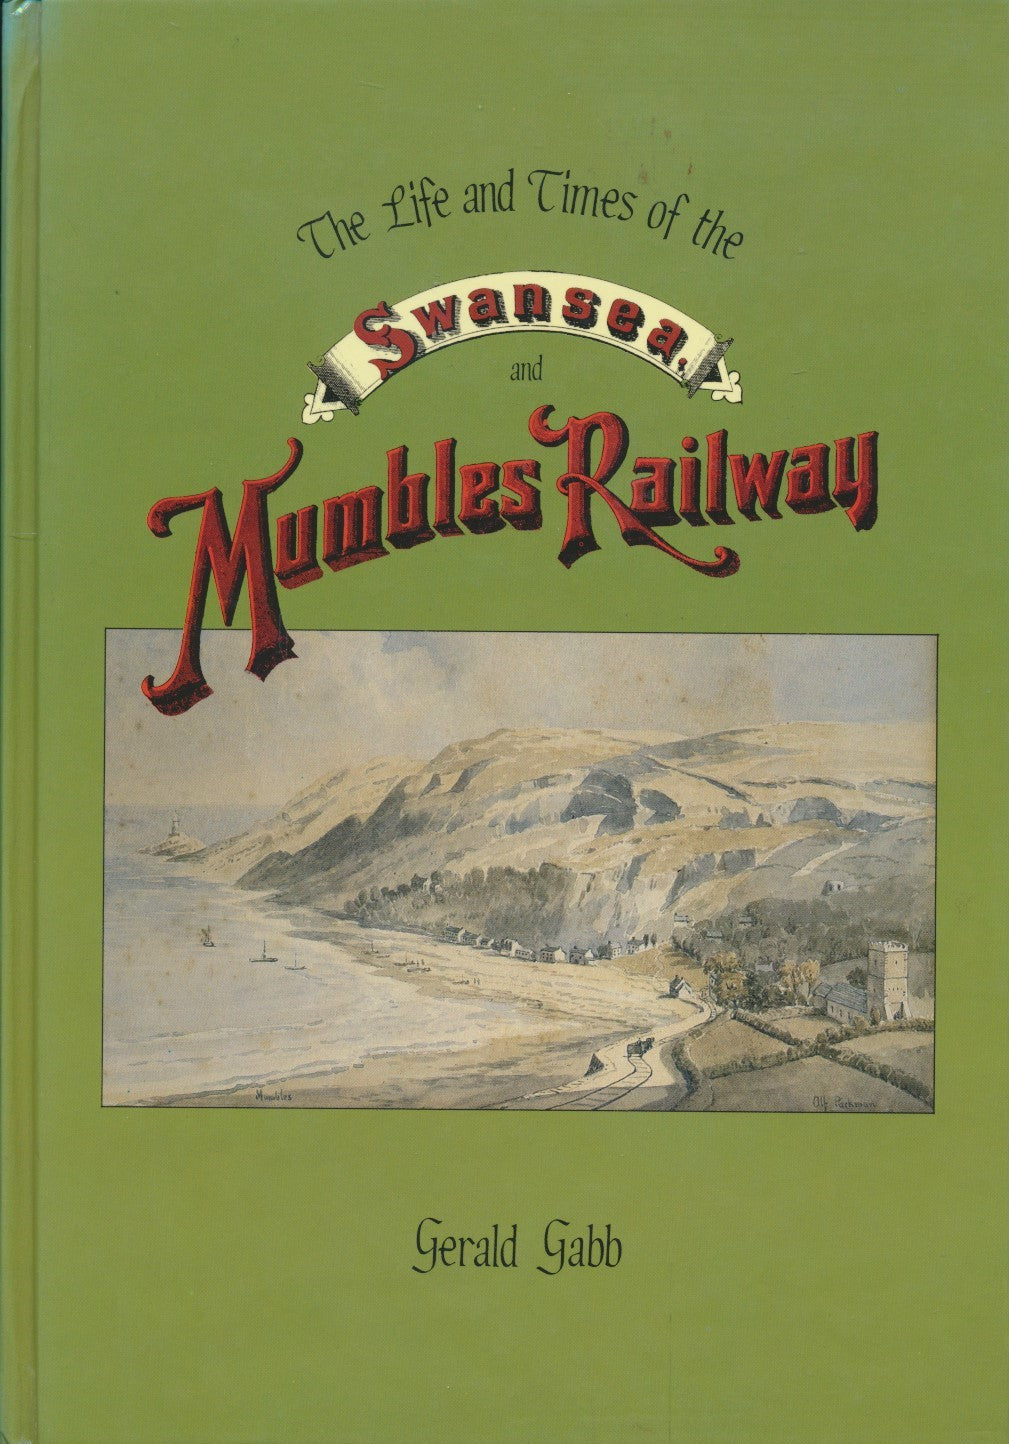 The Life and Times of the Swansea and Mumbles Railway